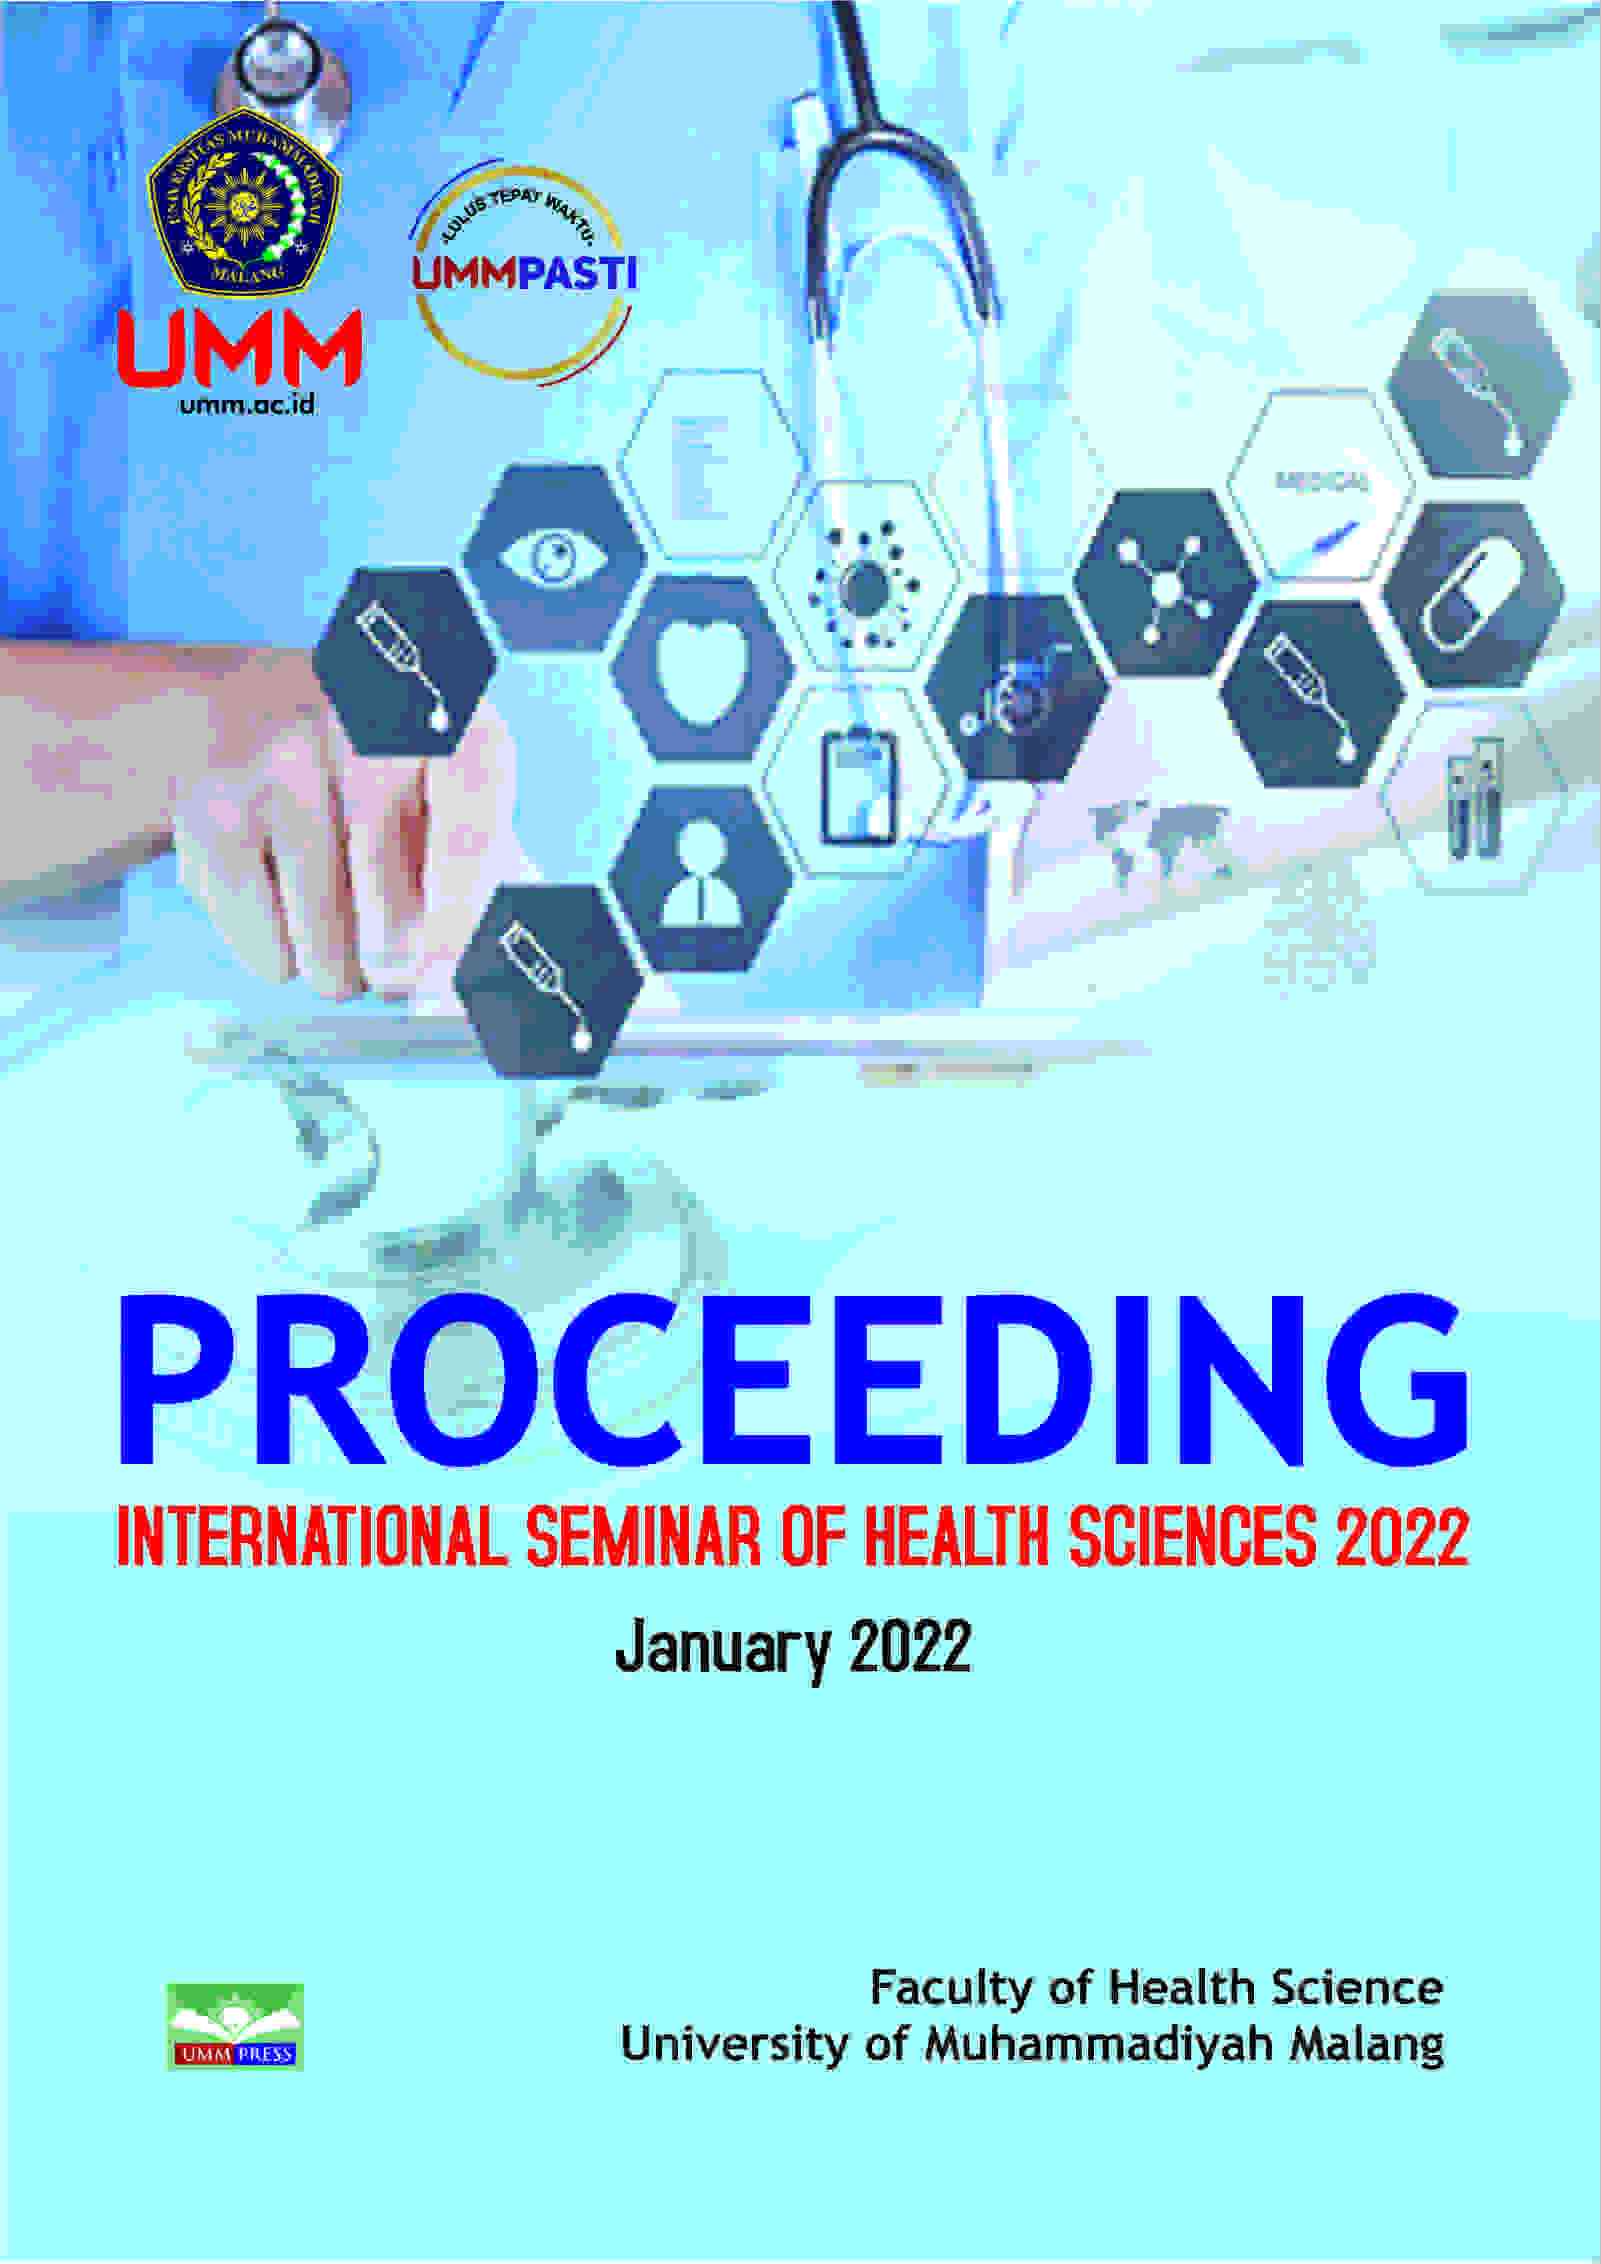 PROCEEDING INTERNATIONAL SEMINAR OF HEALTH SCIENCES 2022: STRENGTHENING NON-COMMUNICABLE DISEASES ED